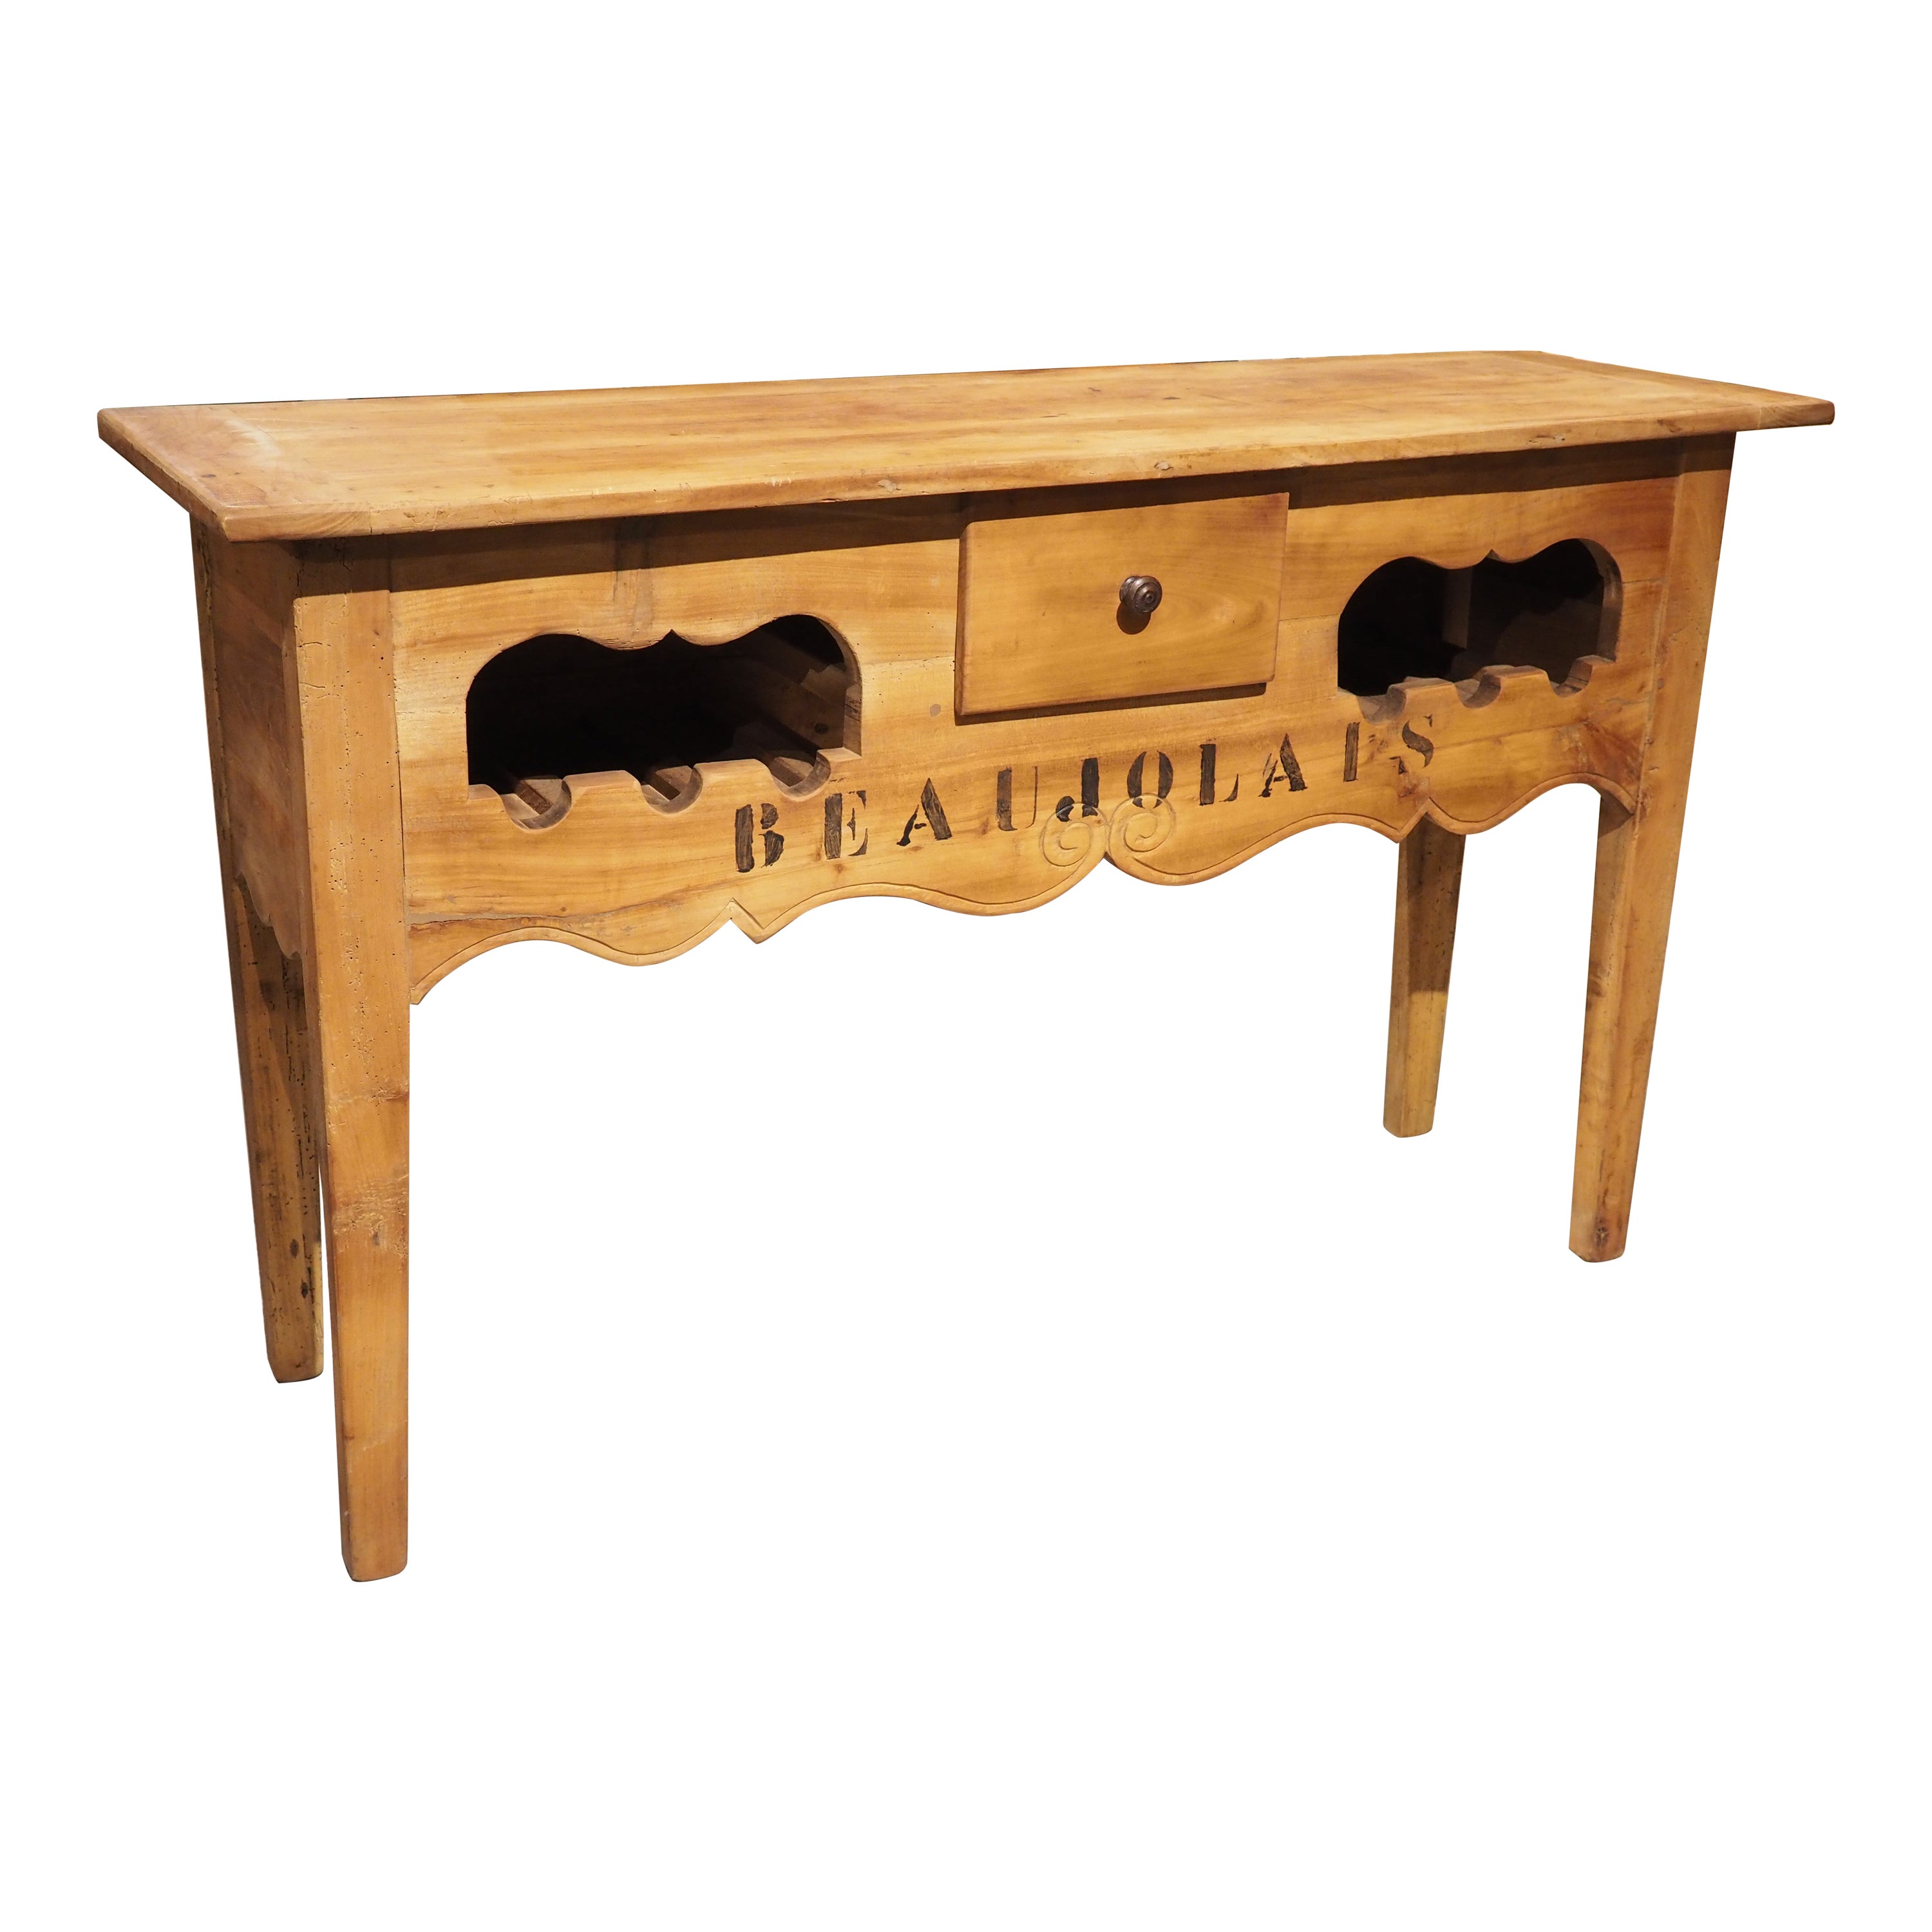 "Beaujolais" Wooden French Console Table with 6 Bottle Wine Rack